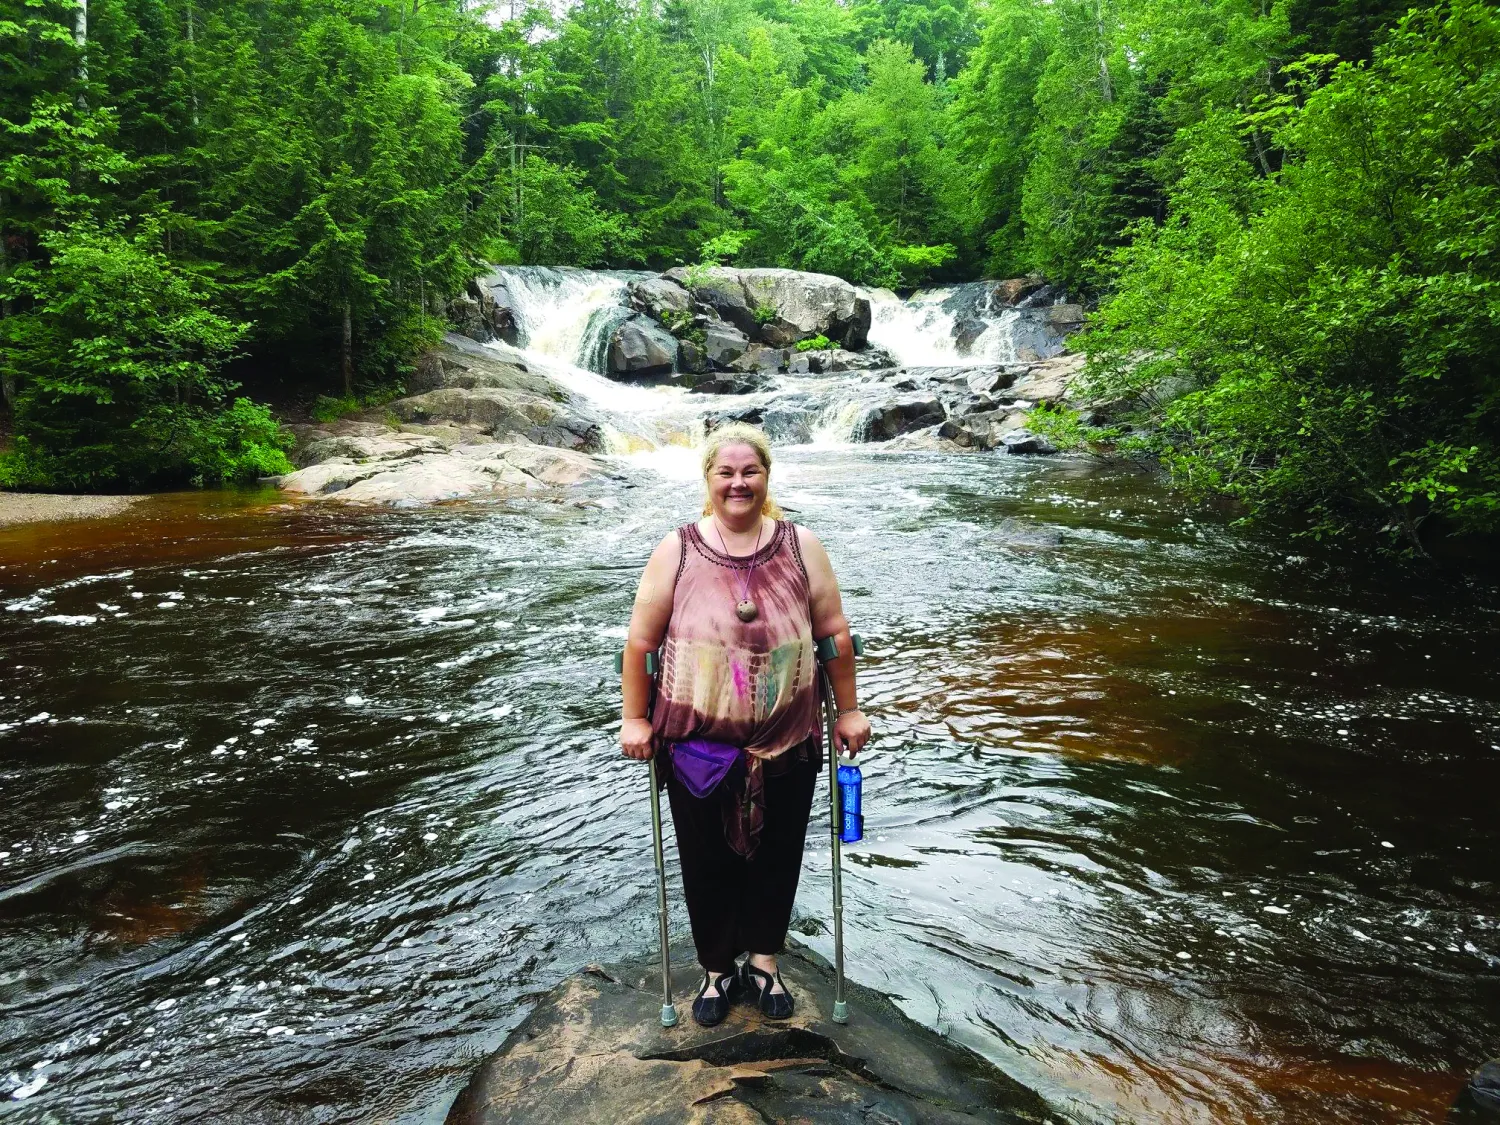 Tina standing in a river